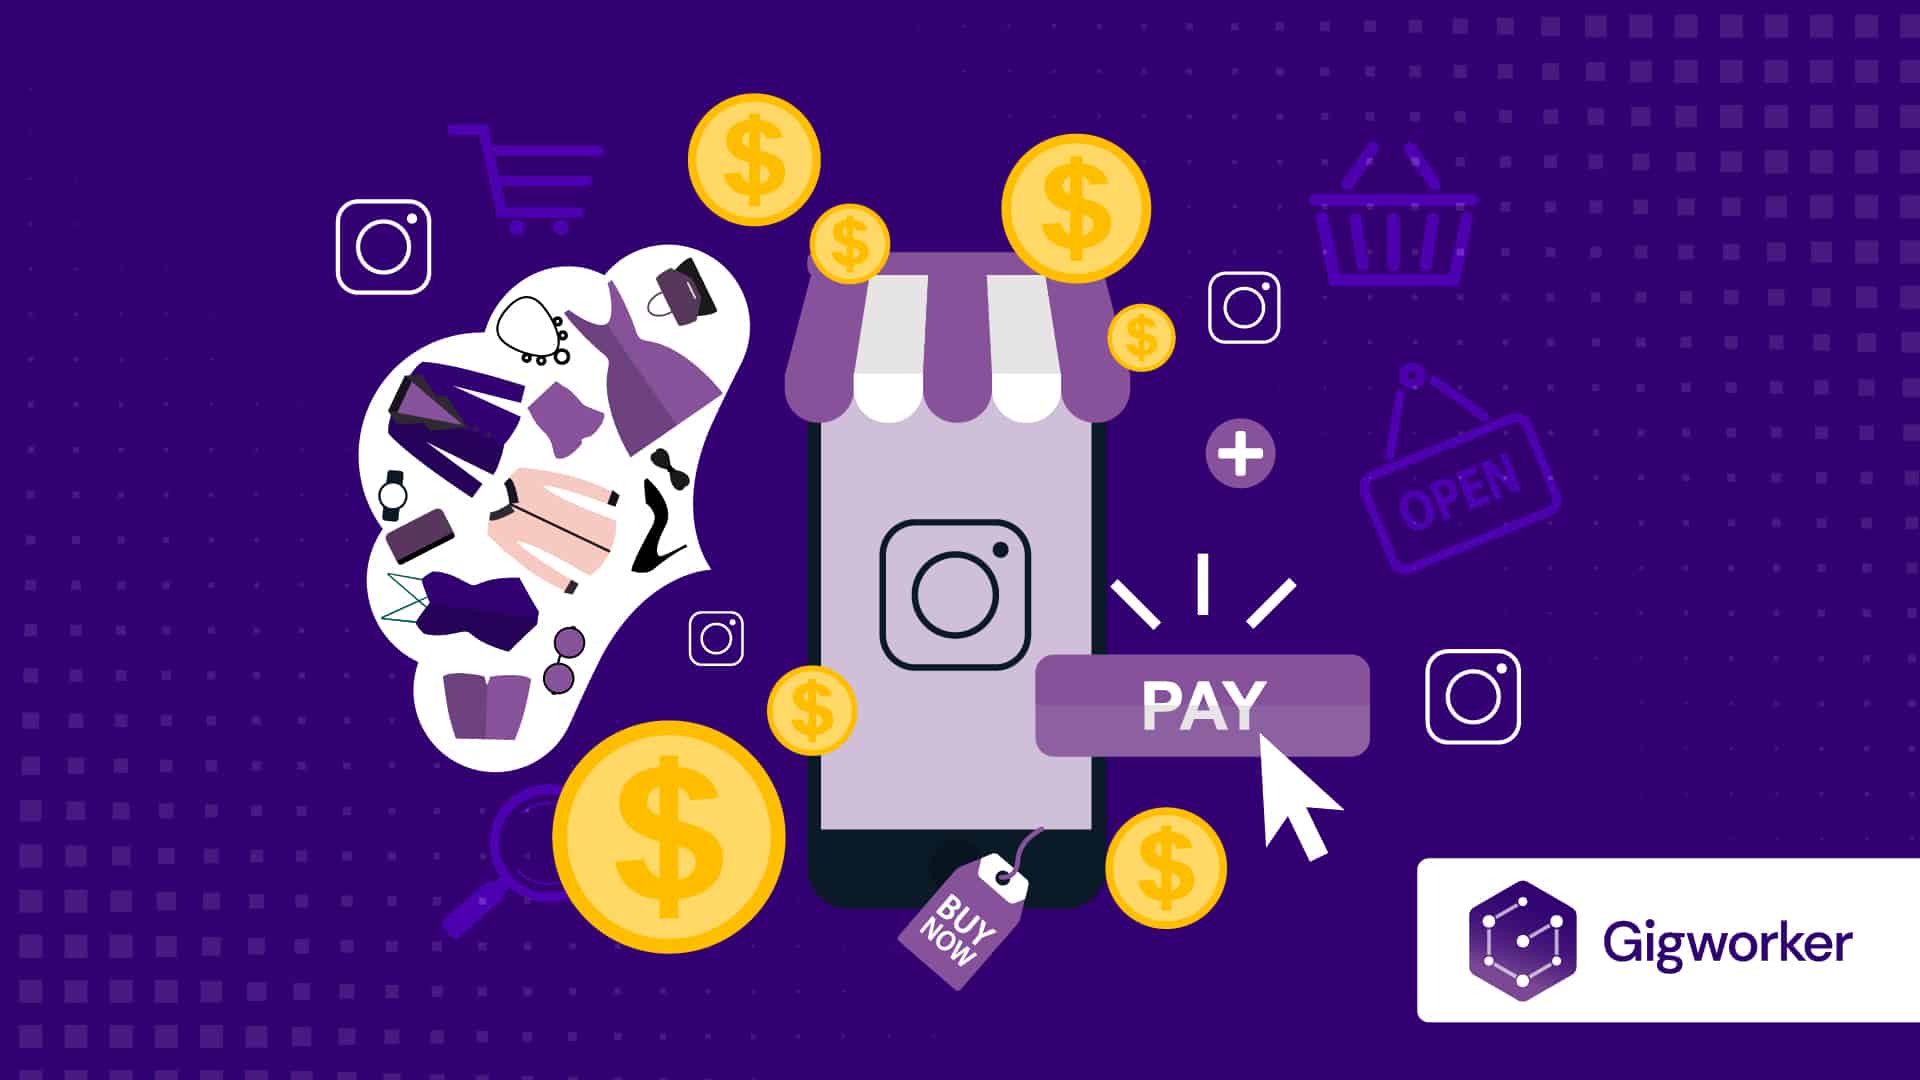 vector graphic showing an illustration of how to sell on Instagram